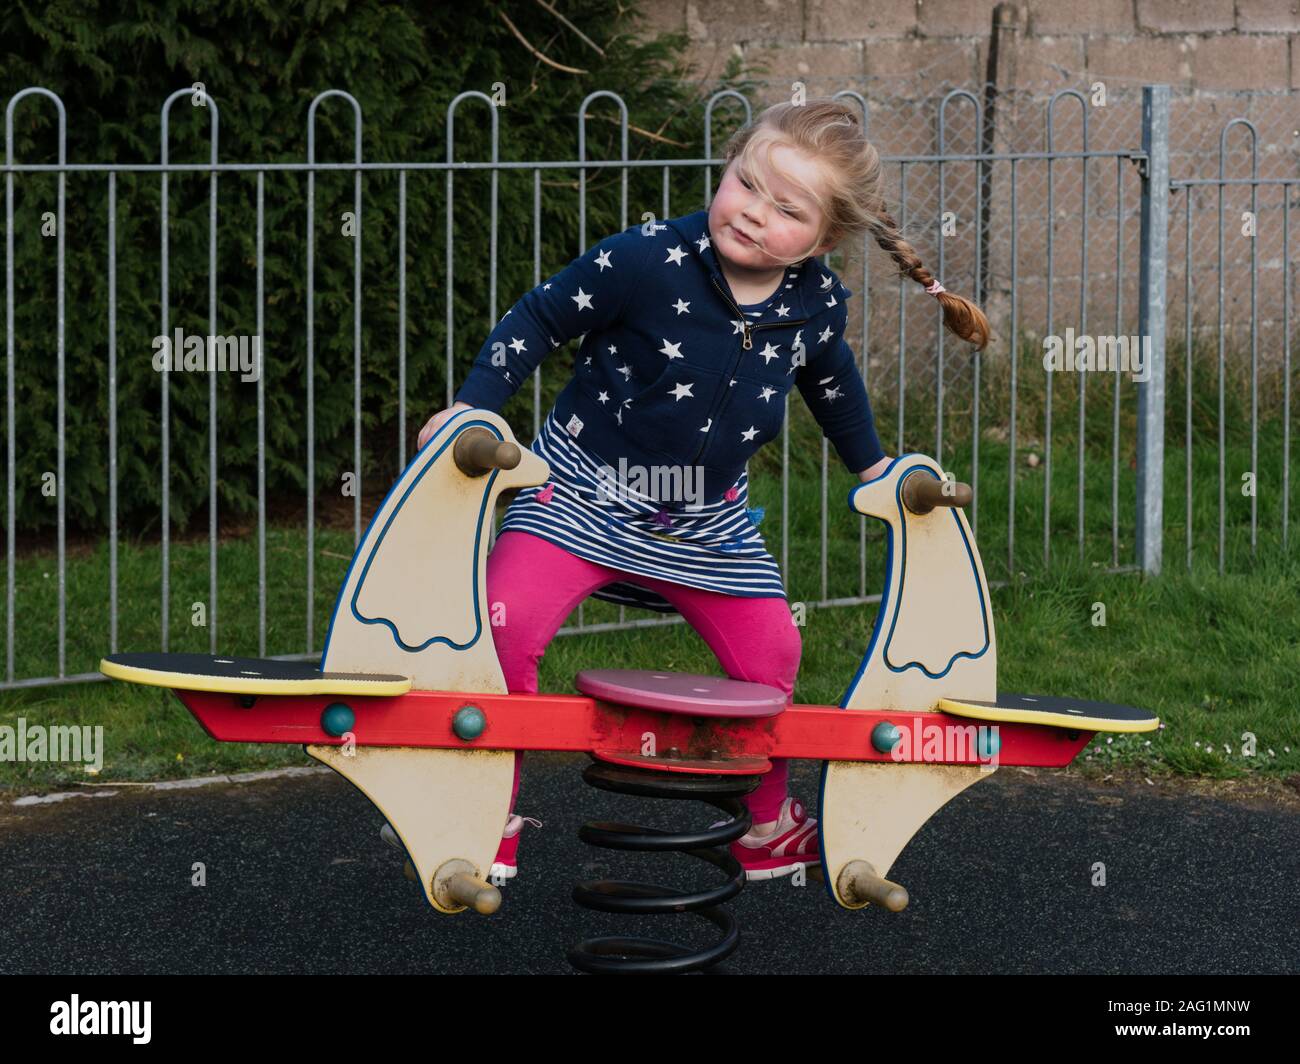 Young girl with pigtails, plaited hair, in a park playground playing on a sea saw. Stock Photo